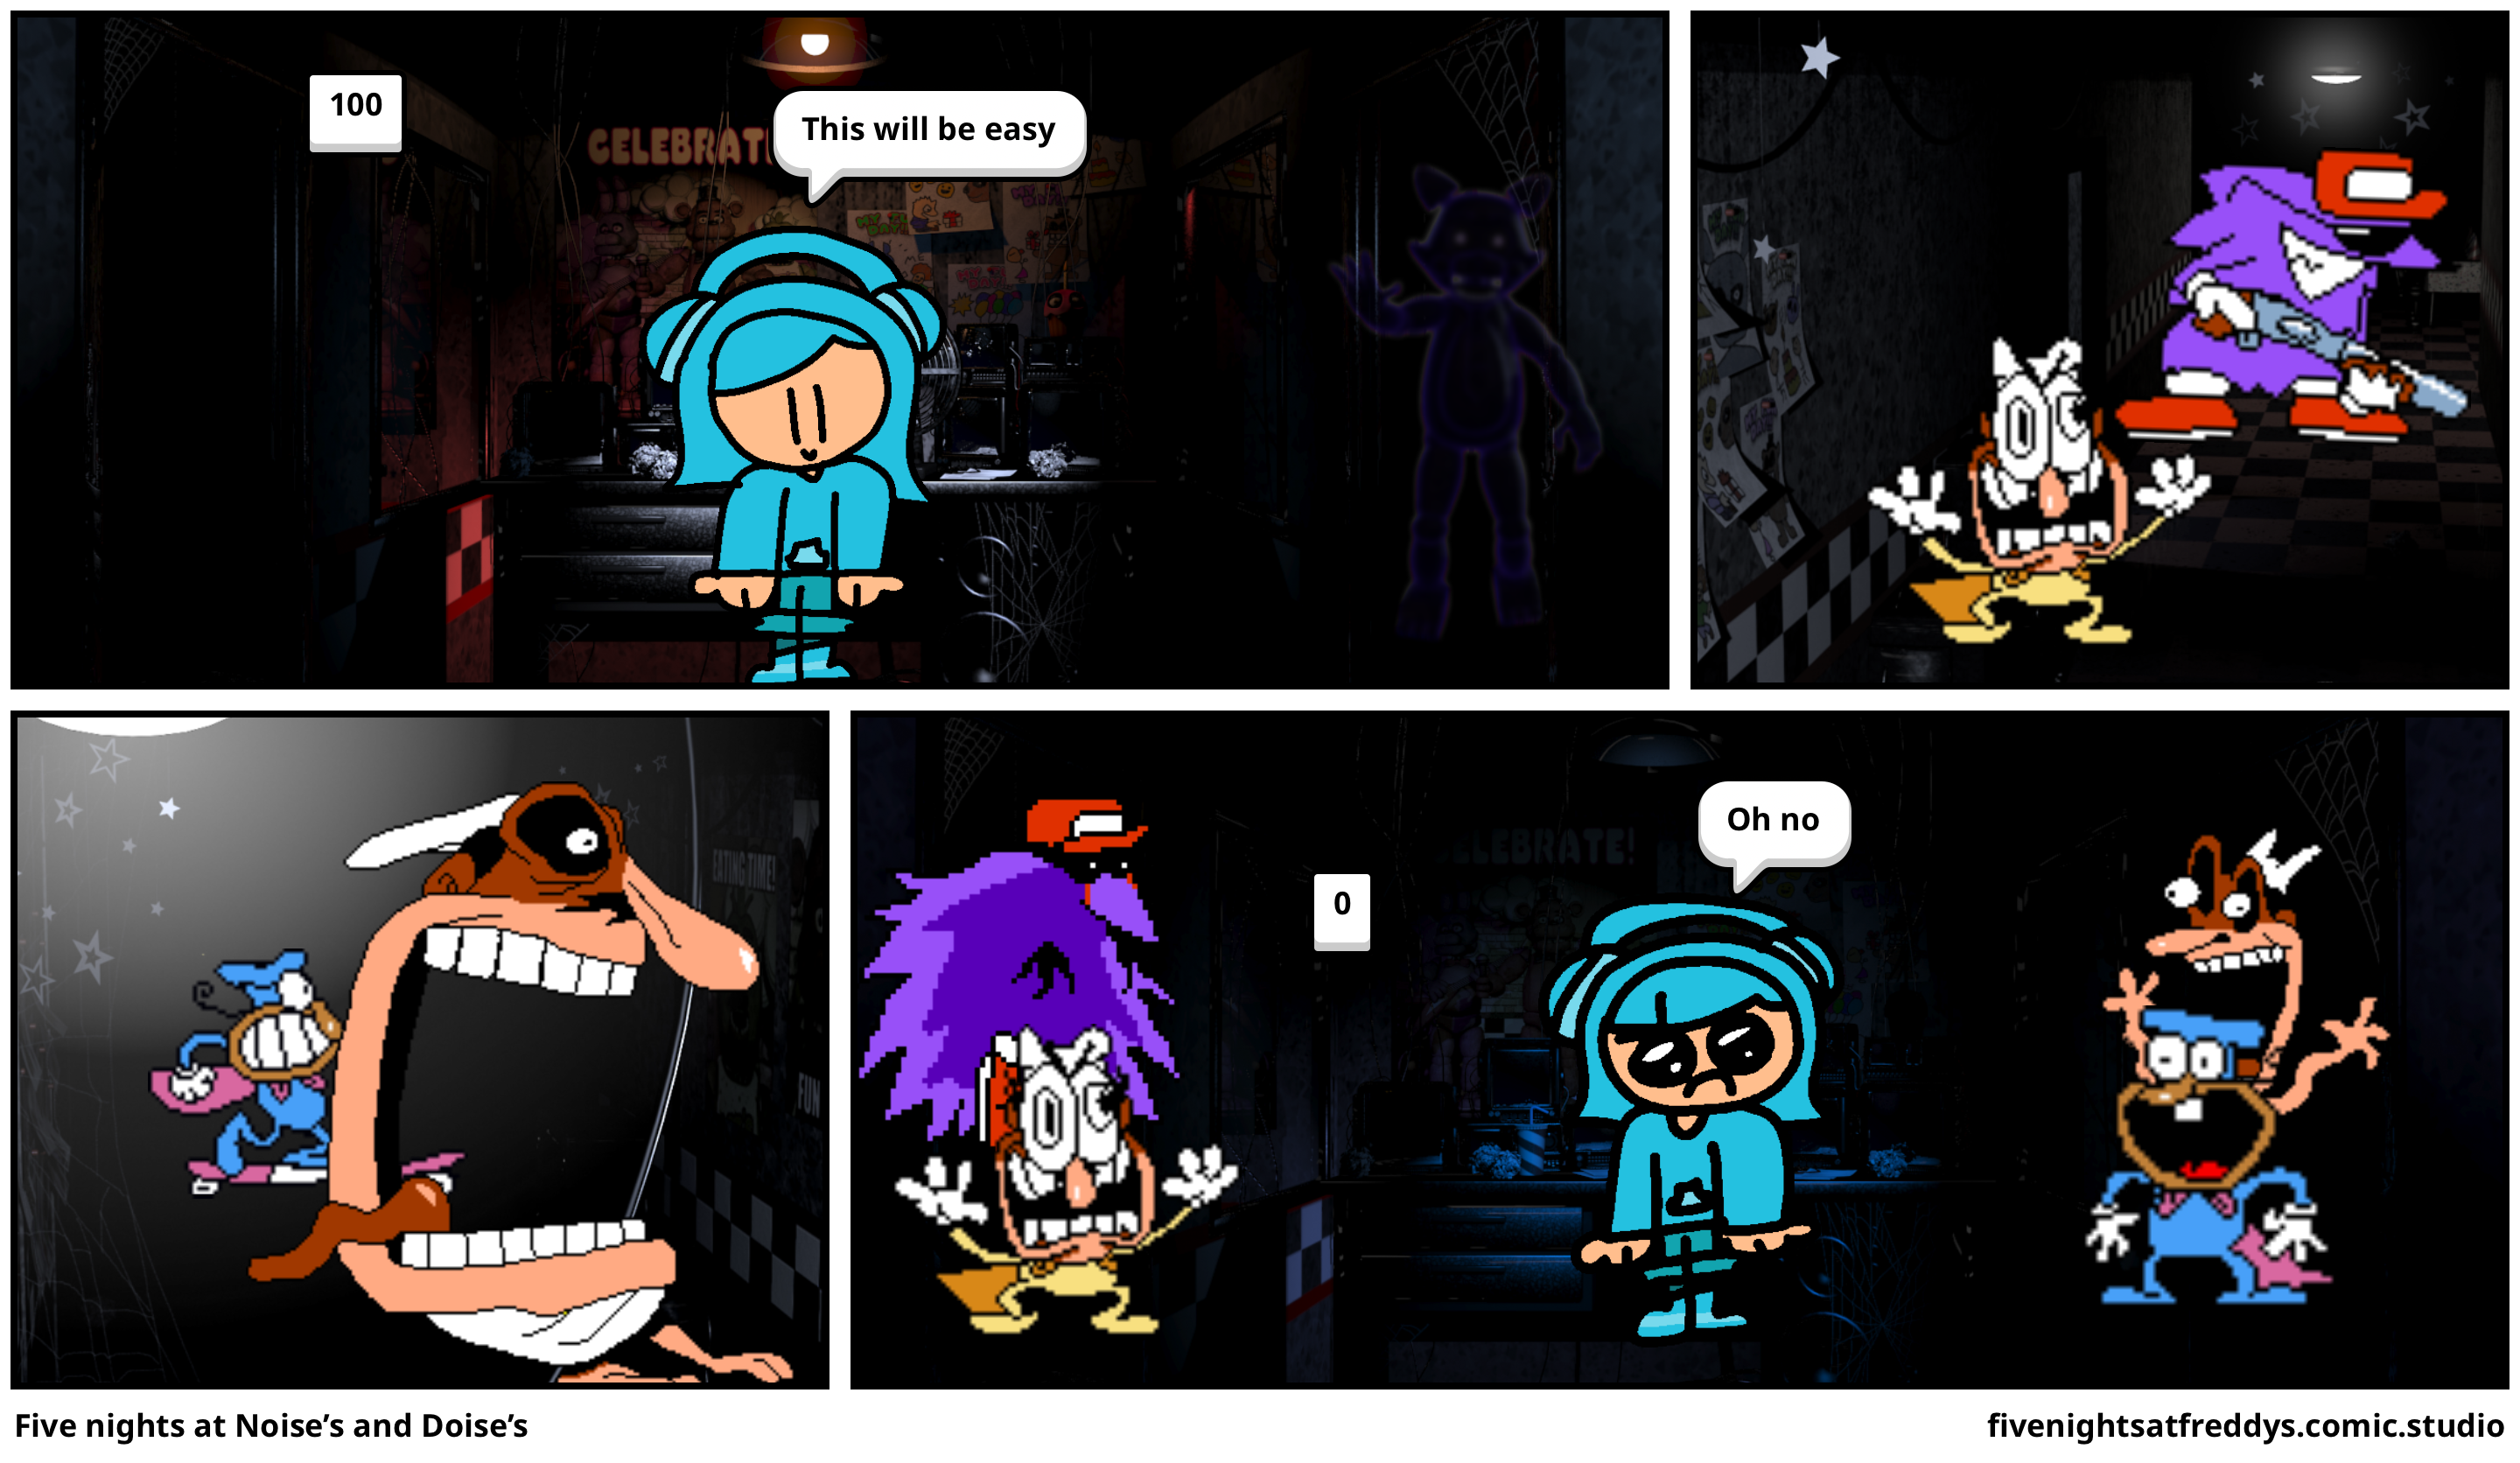 Five nights at Noise’s and Doise’s